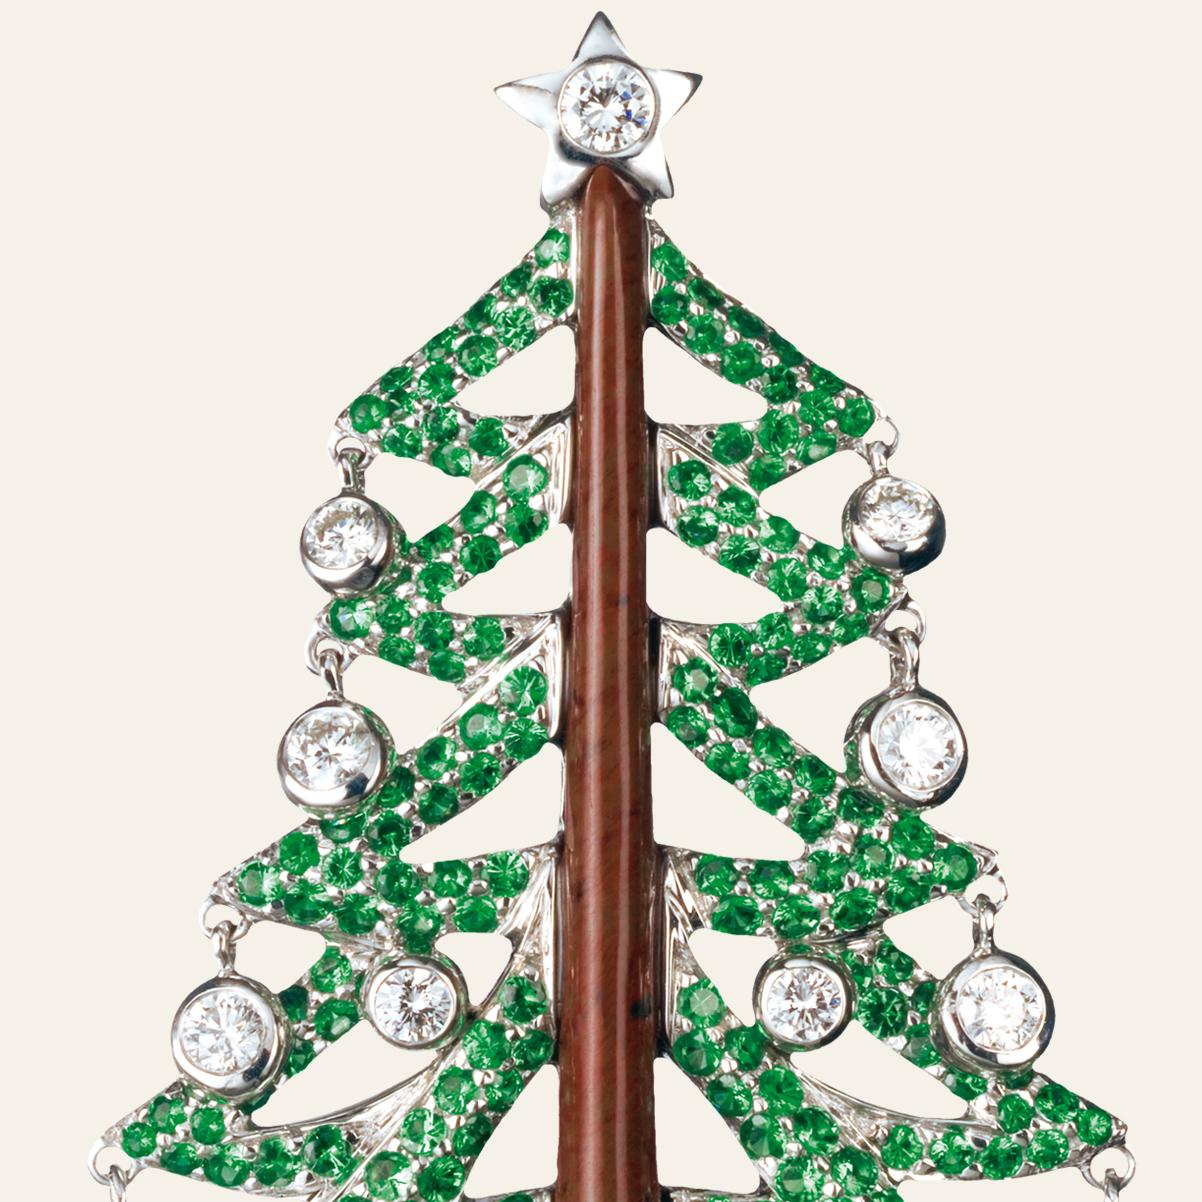 Sabbadini Christmas Tree Brooch In Diamonds & Green Garnets 
18k White gold 'christmas tree' brooch, jasper, diamonds 1,78ct and green garnets 5,49ct. Gold 21,60gr
Hand made jewelry & designed in Milan, in Via Montenapoleone.
This item comes